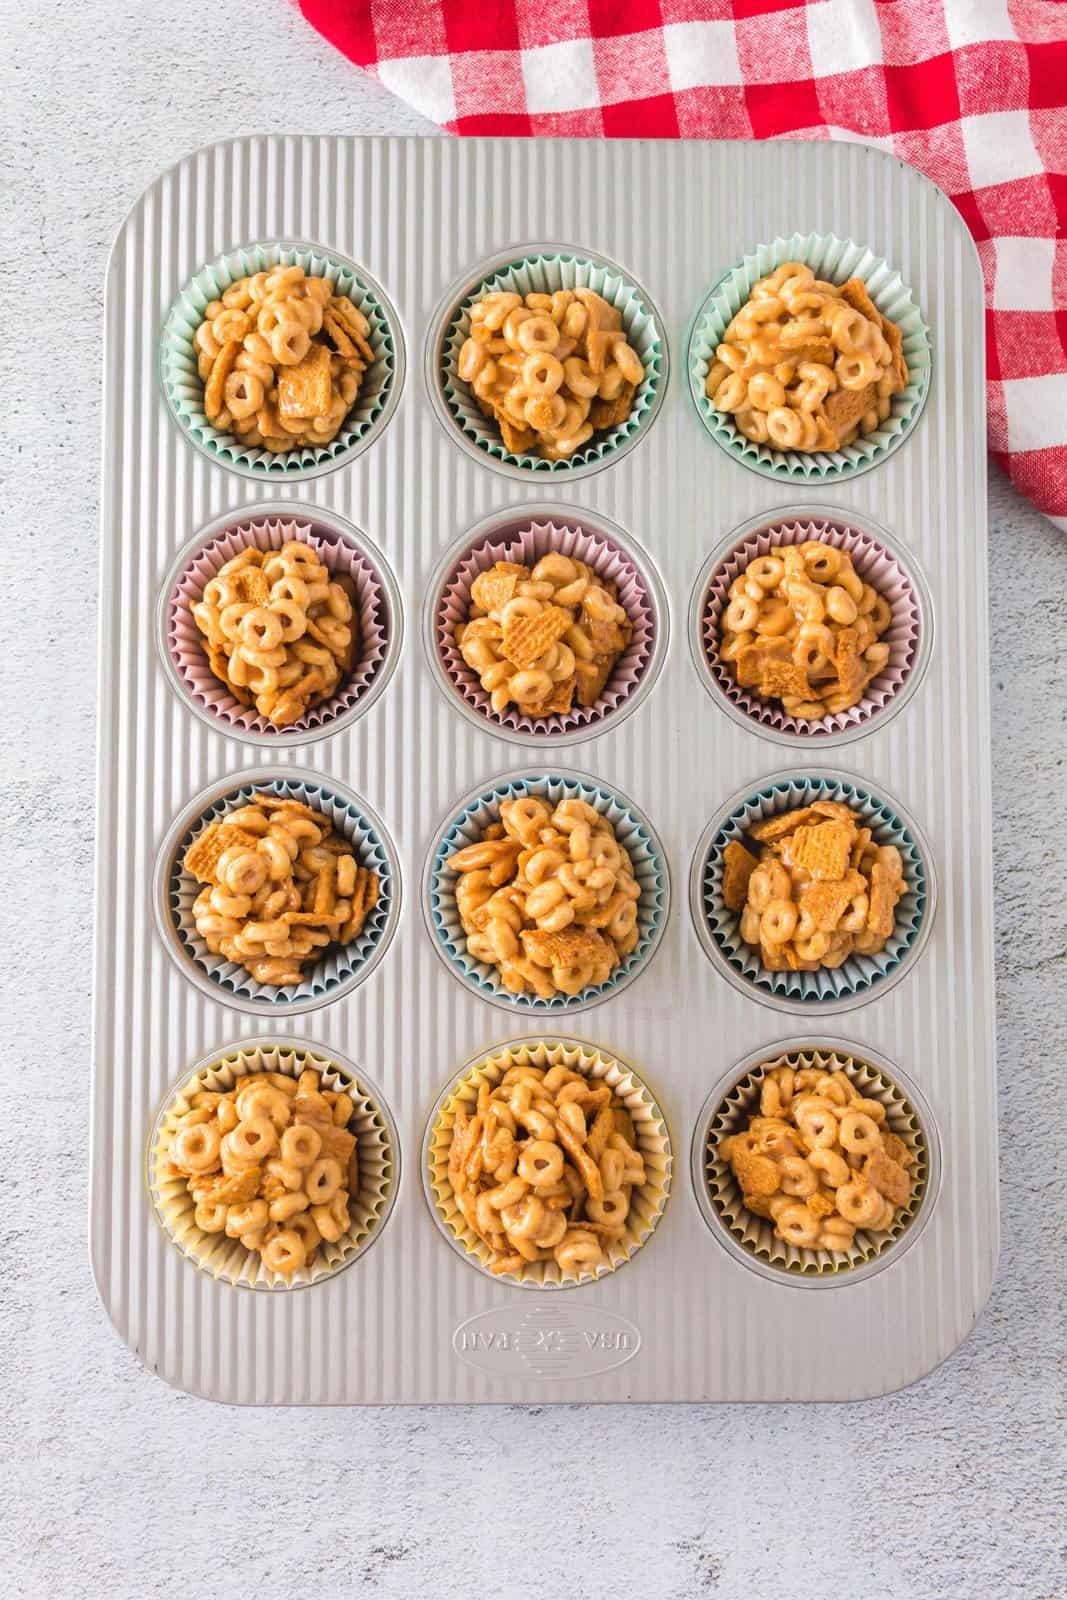 Cheerio Balls in liners in muffin tiin.